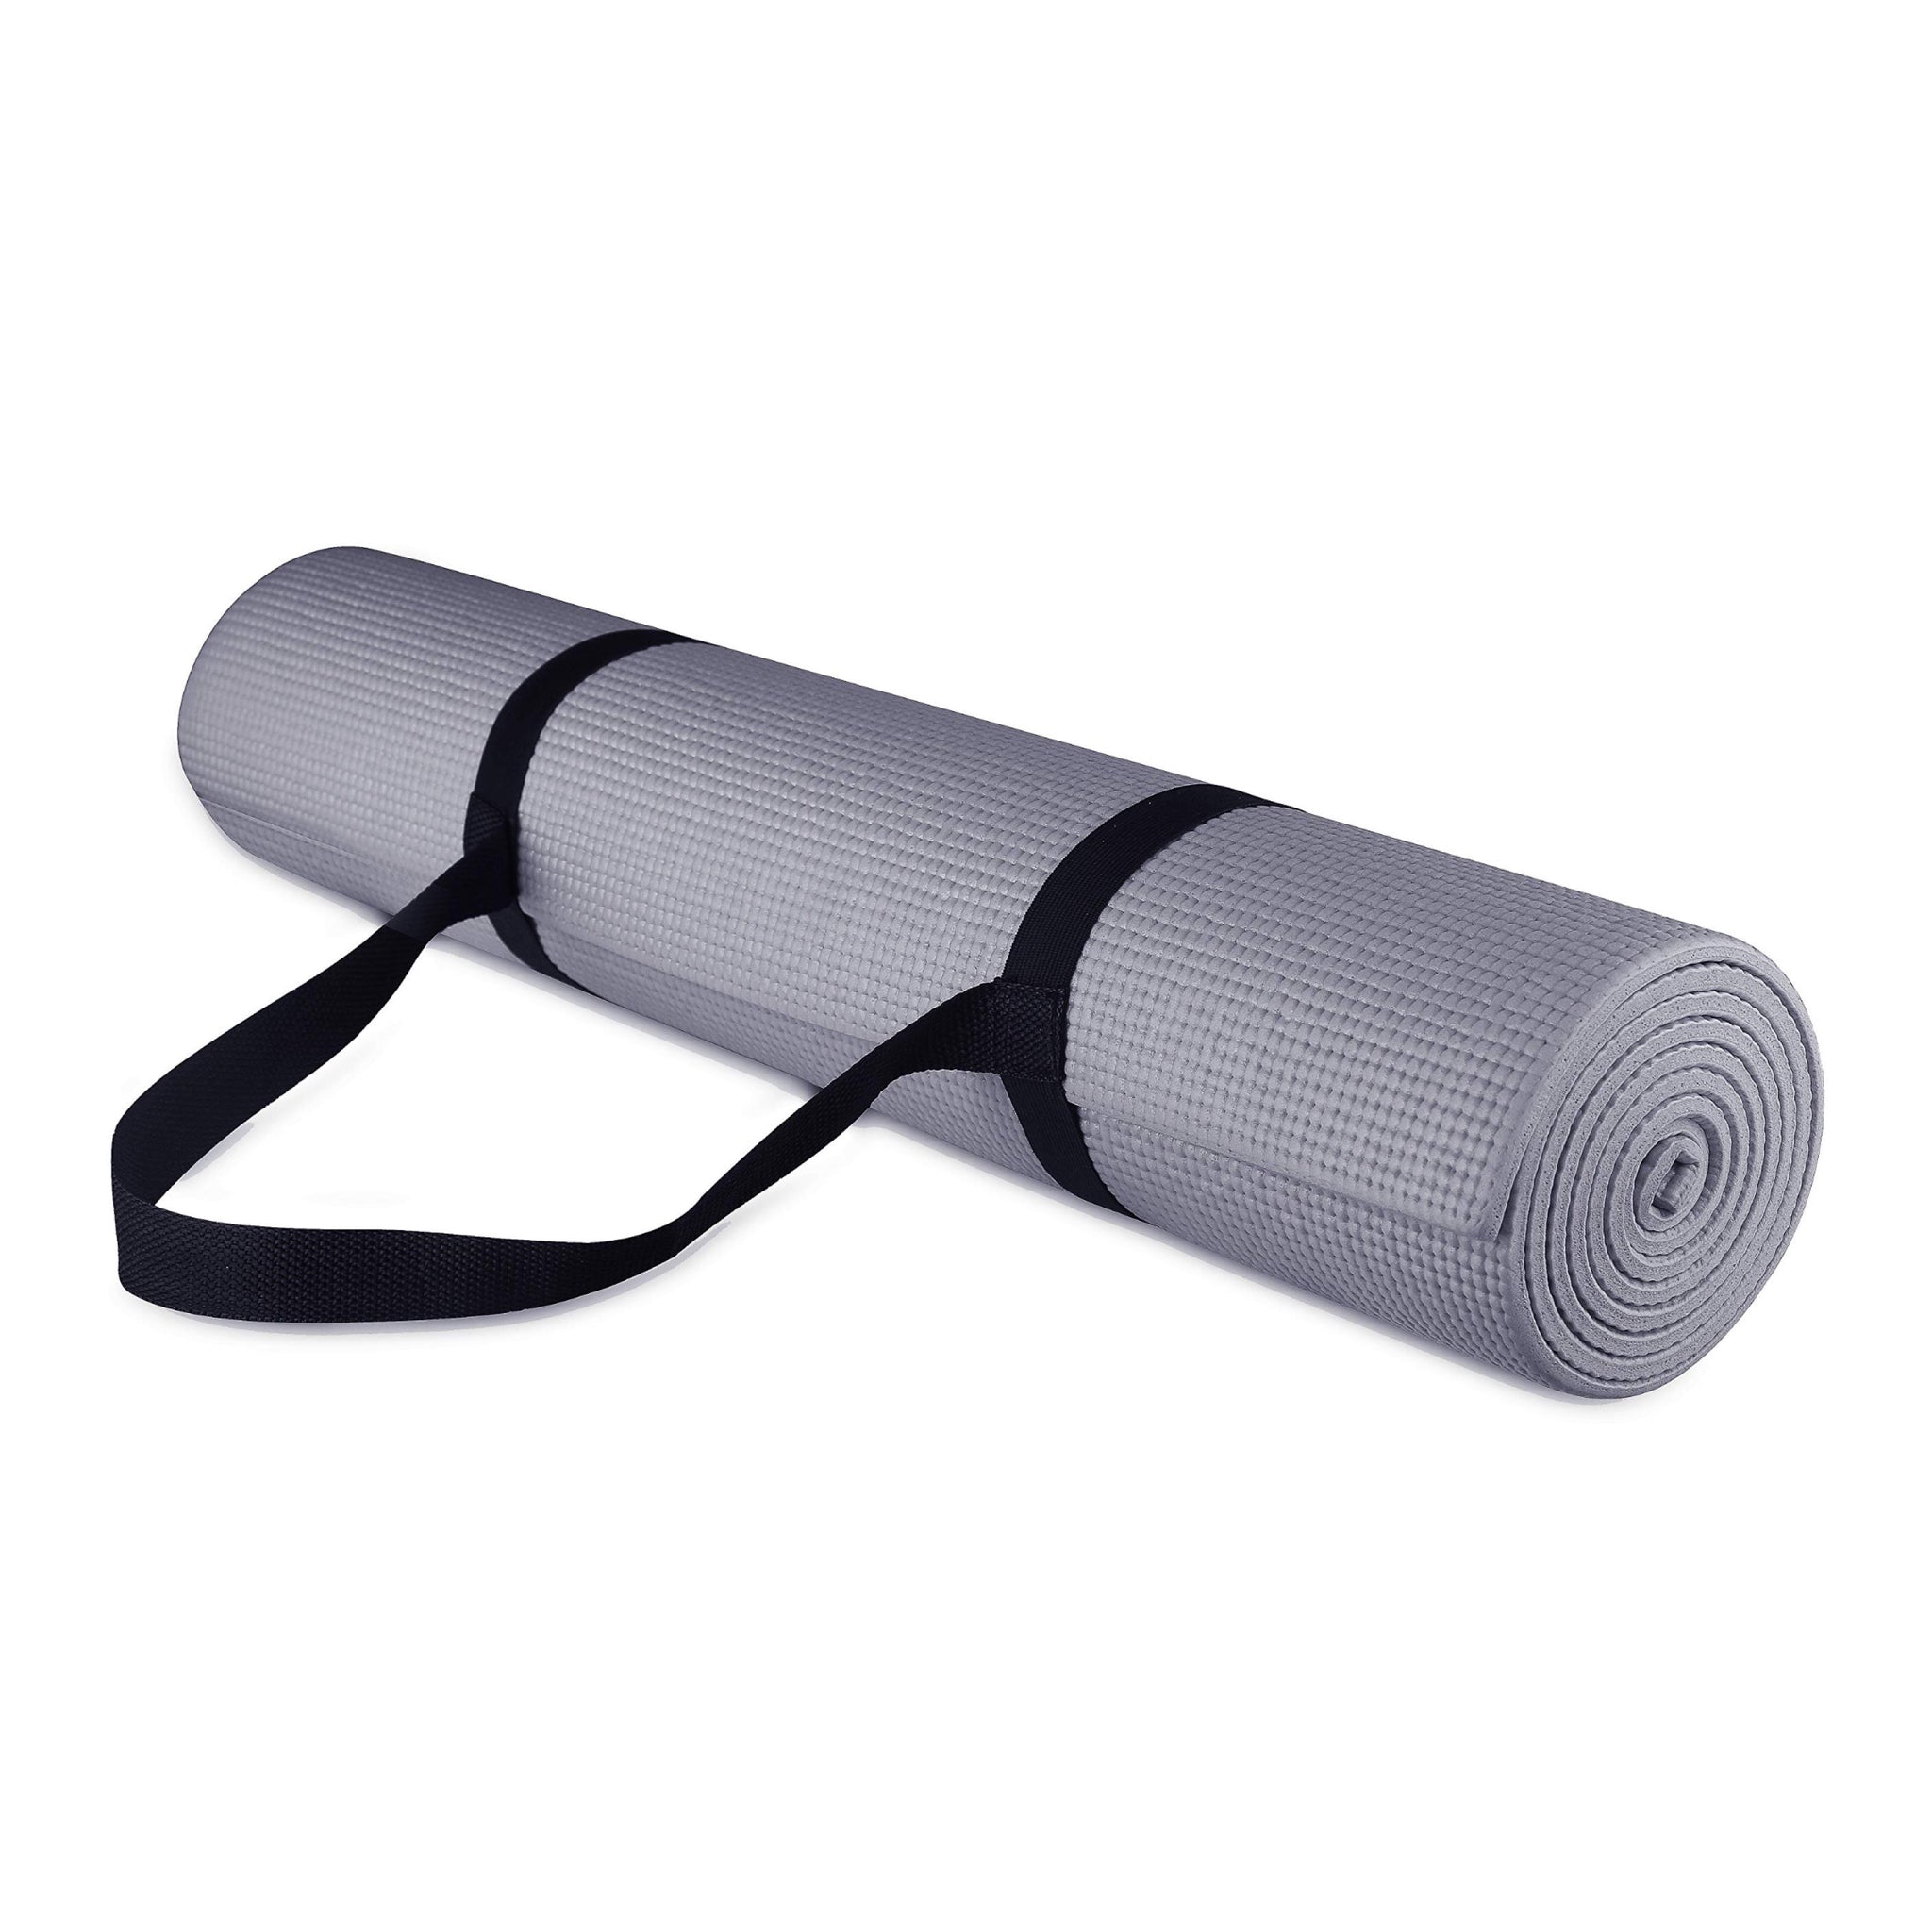 Get ready to level up your yoga practice with BalanceFrom GoYoga mat!